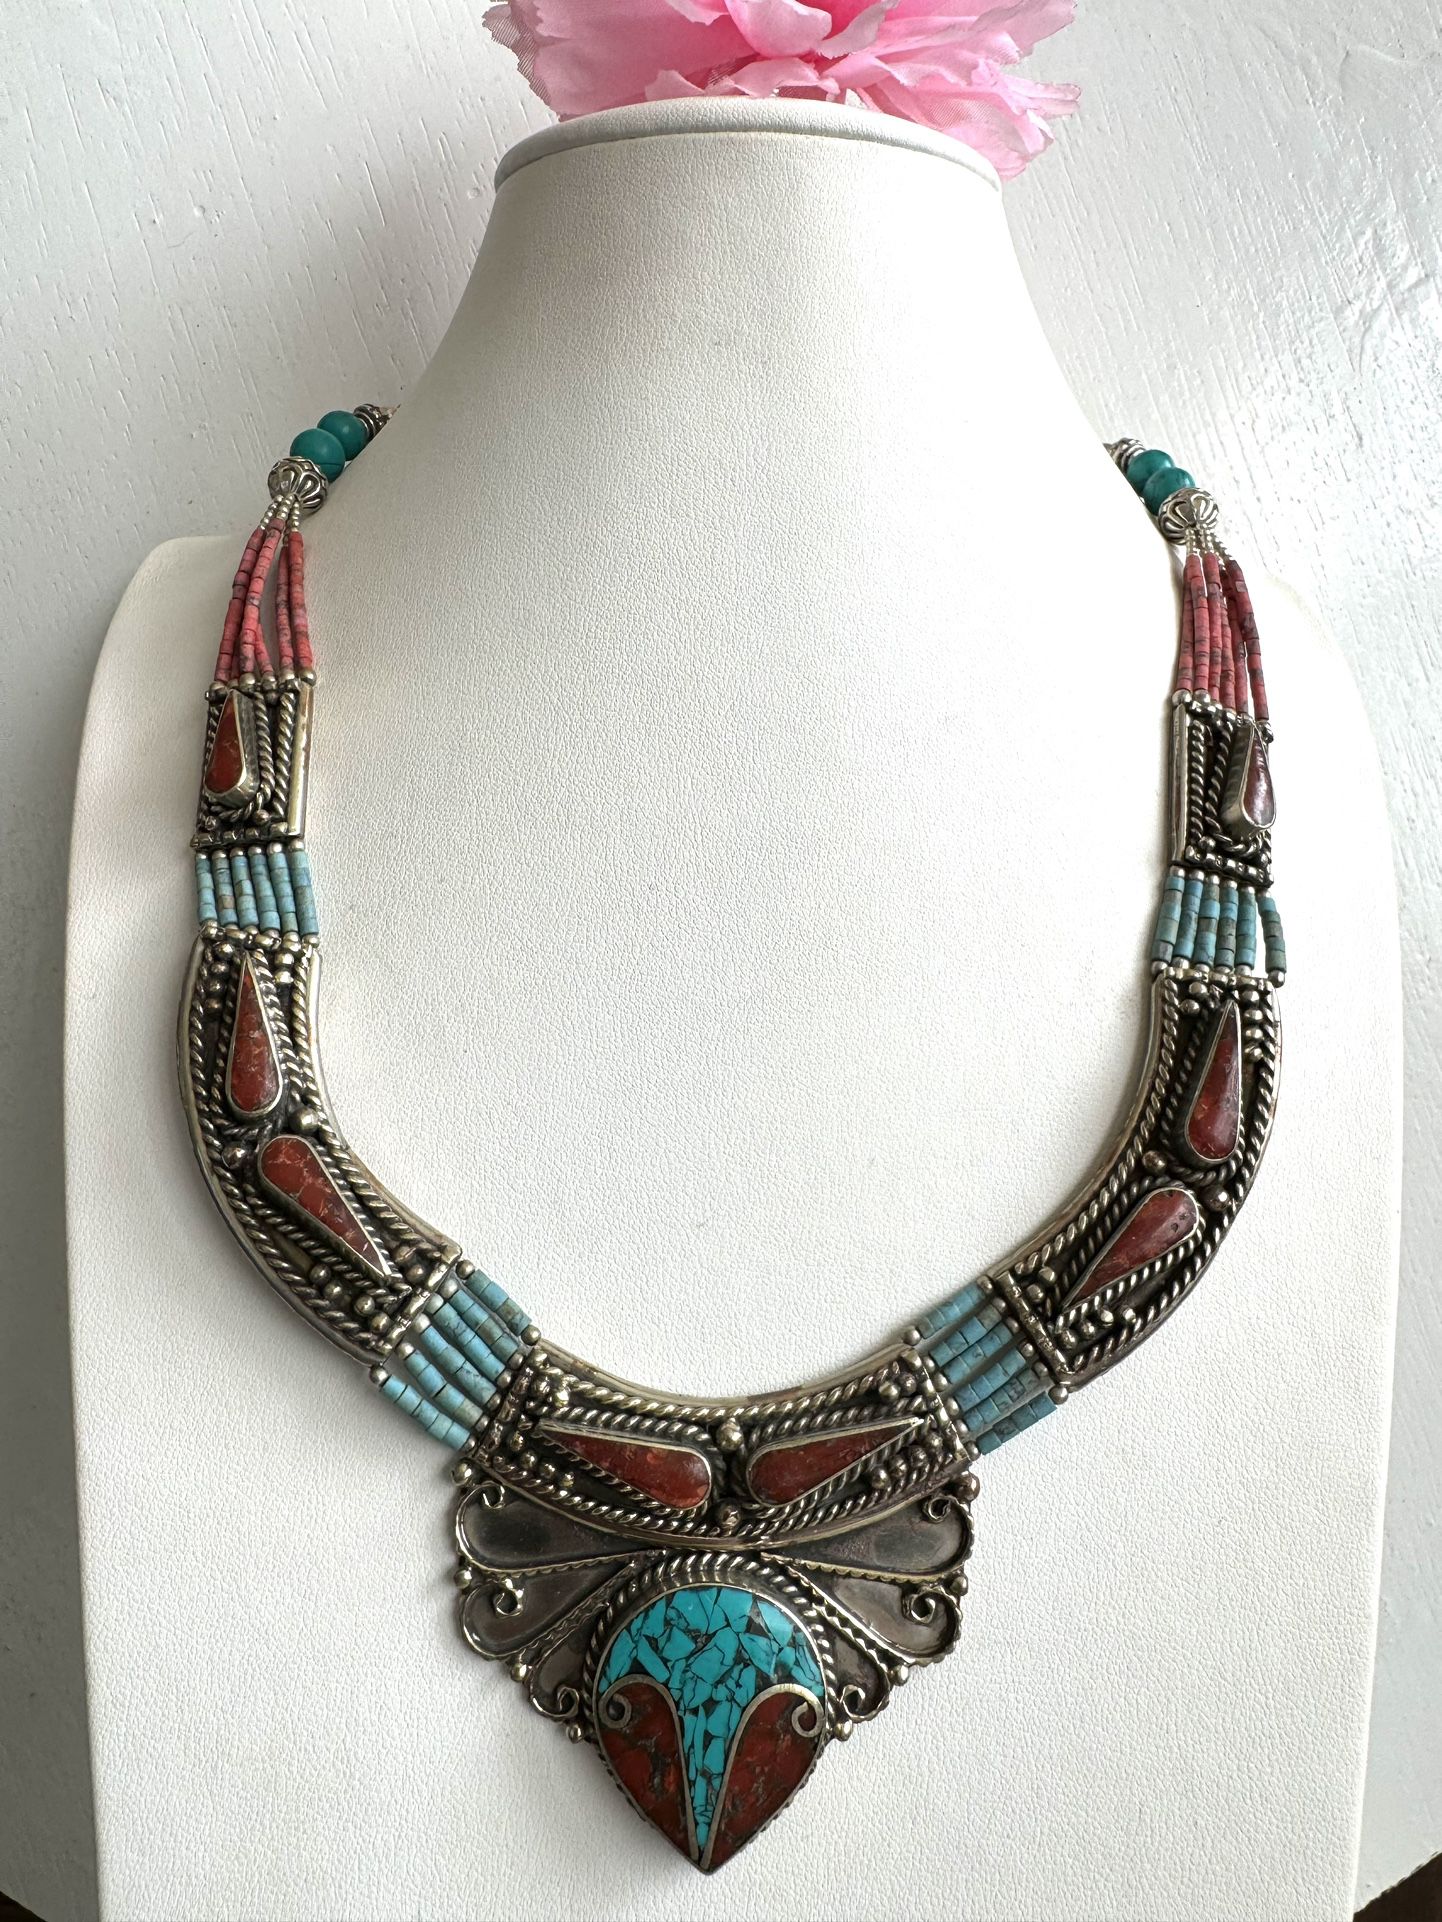 vintage tribal handmade necklace with tibetan silver 19”inch long